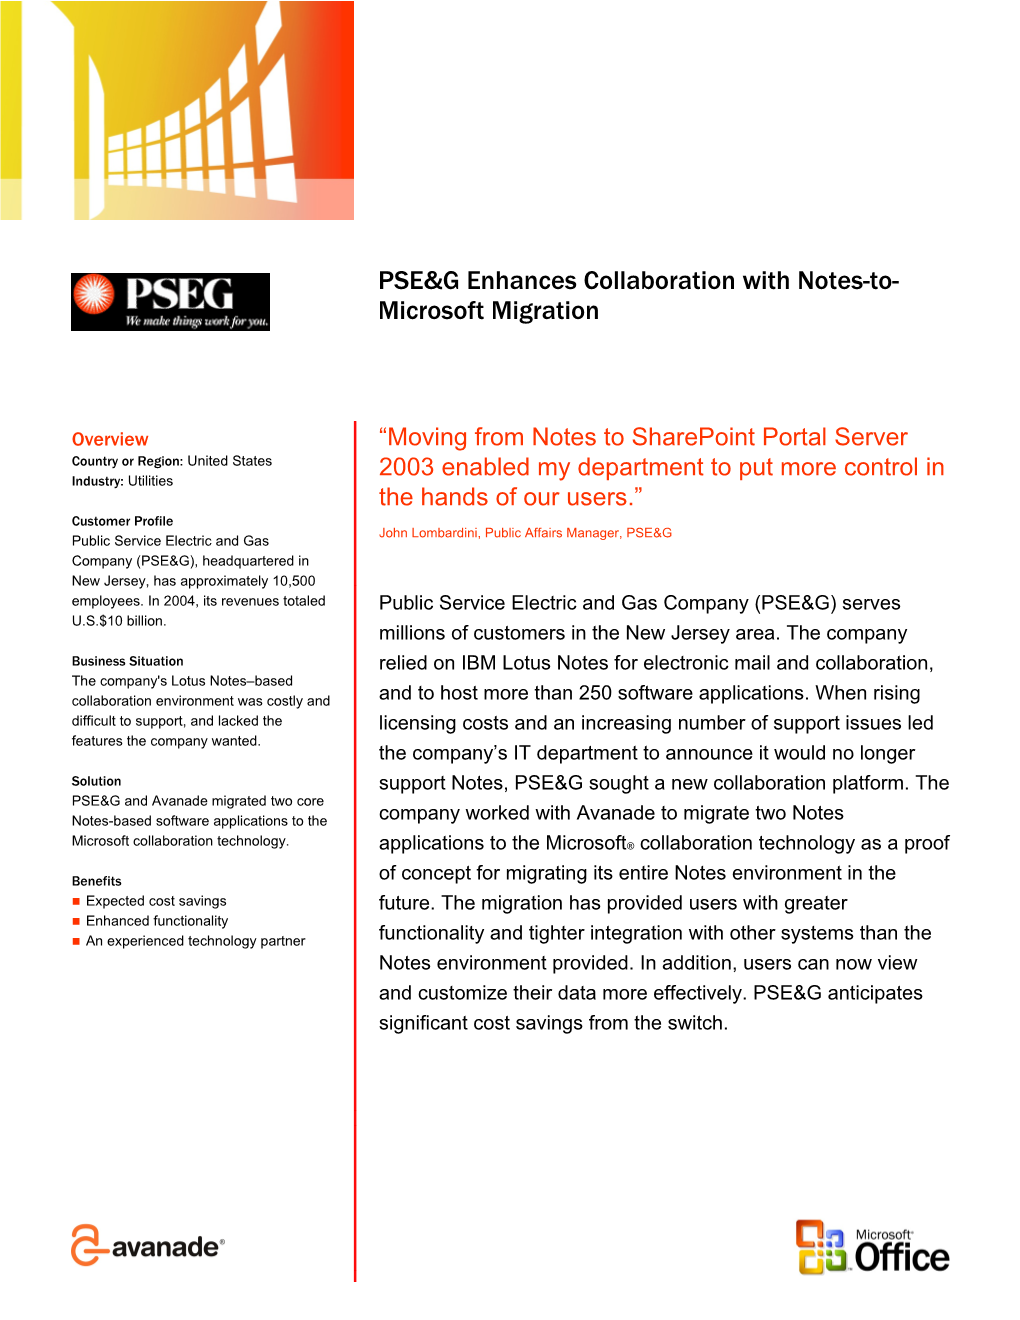 PSE&G Enhances Collaboration with Notes-To-Microsoft Migration